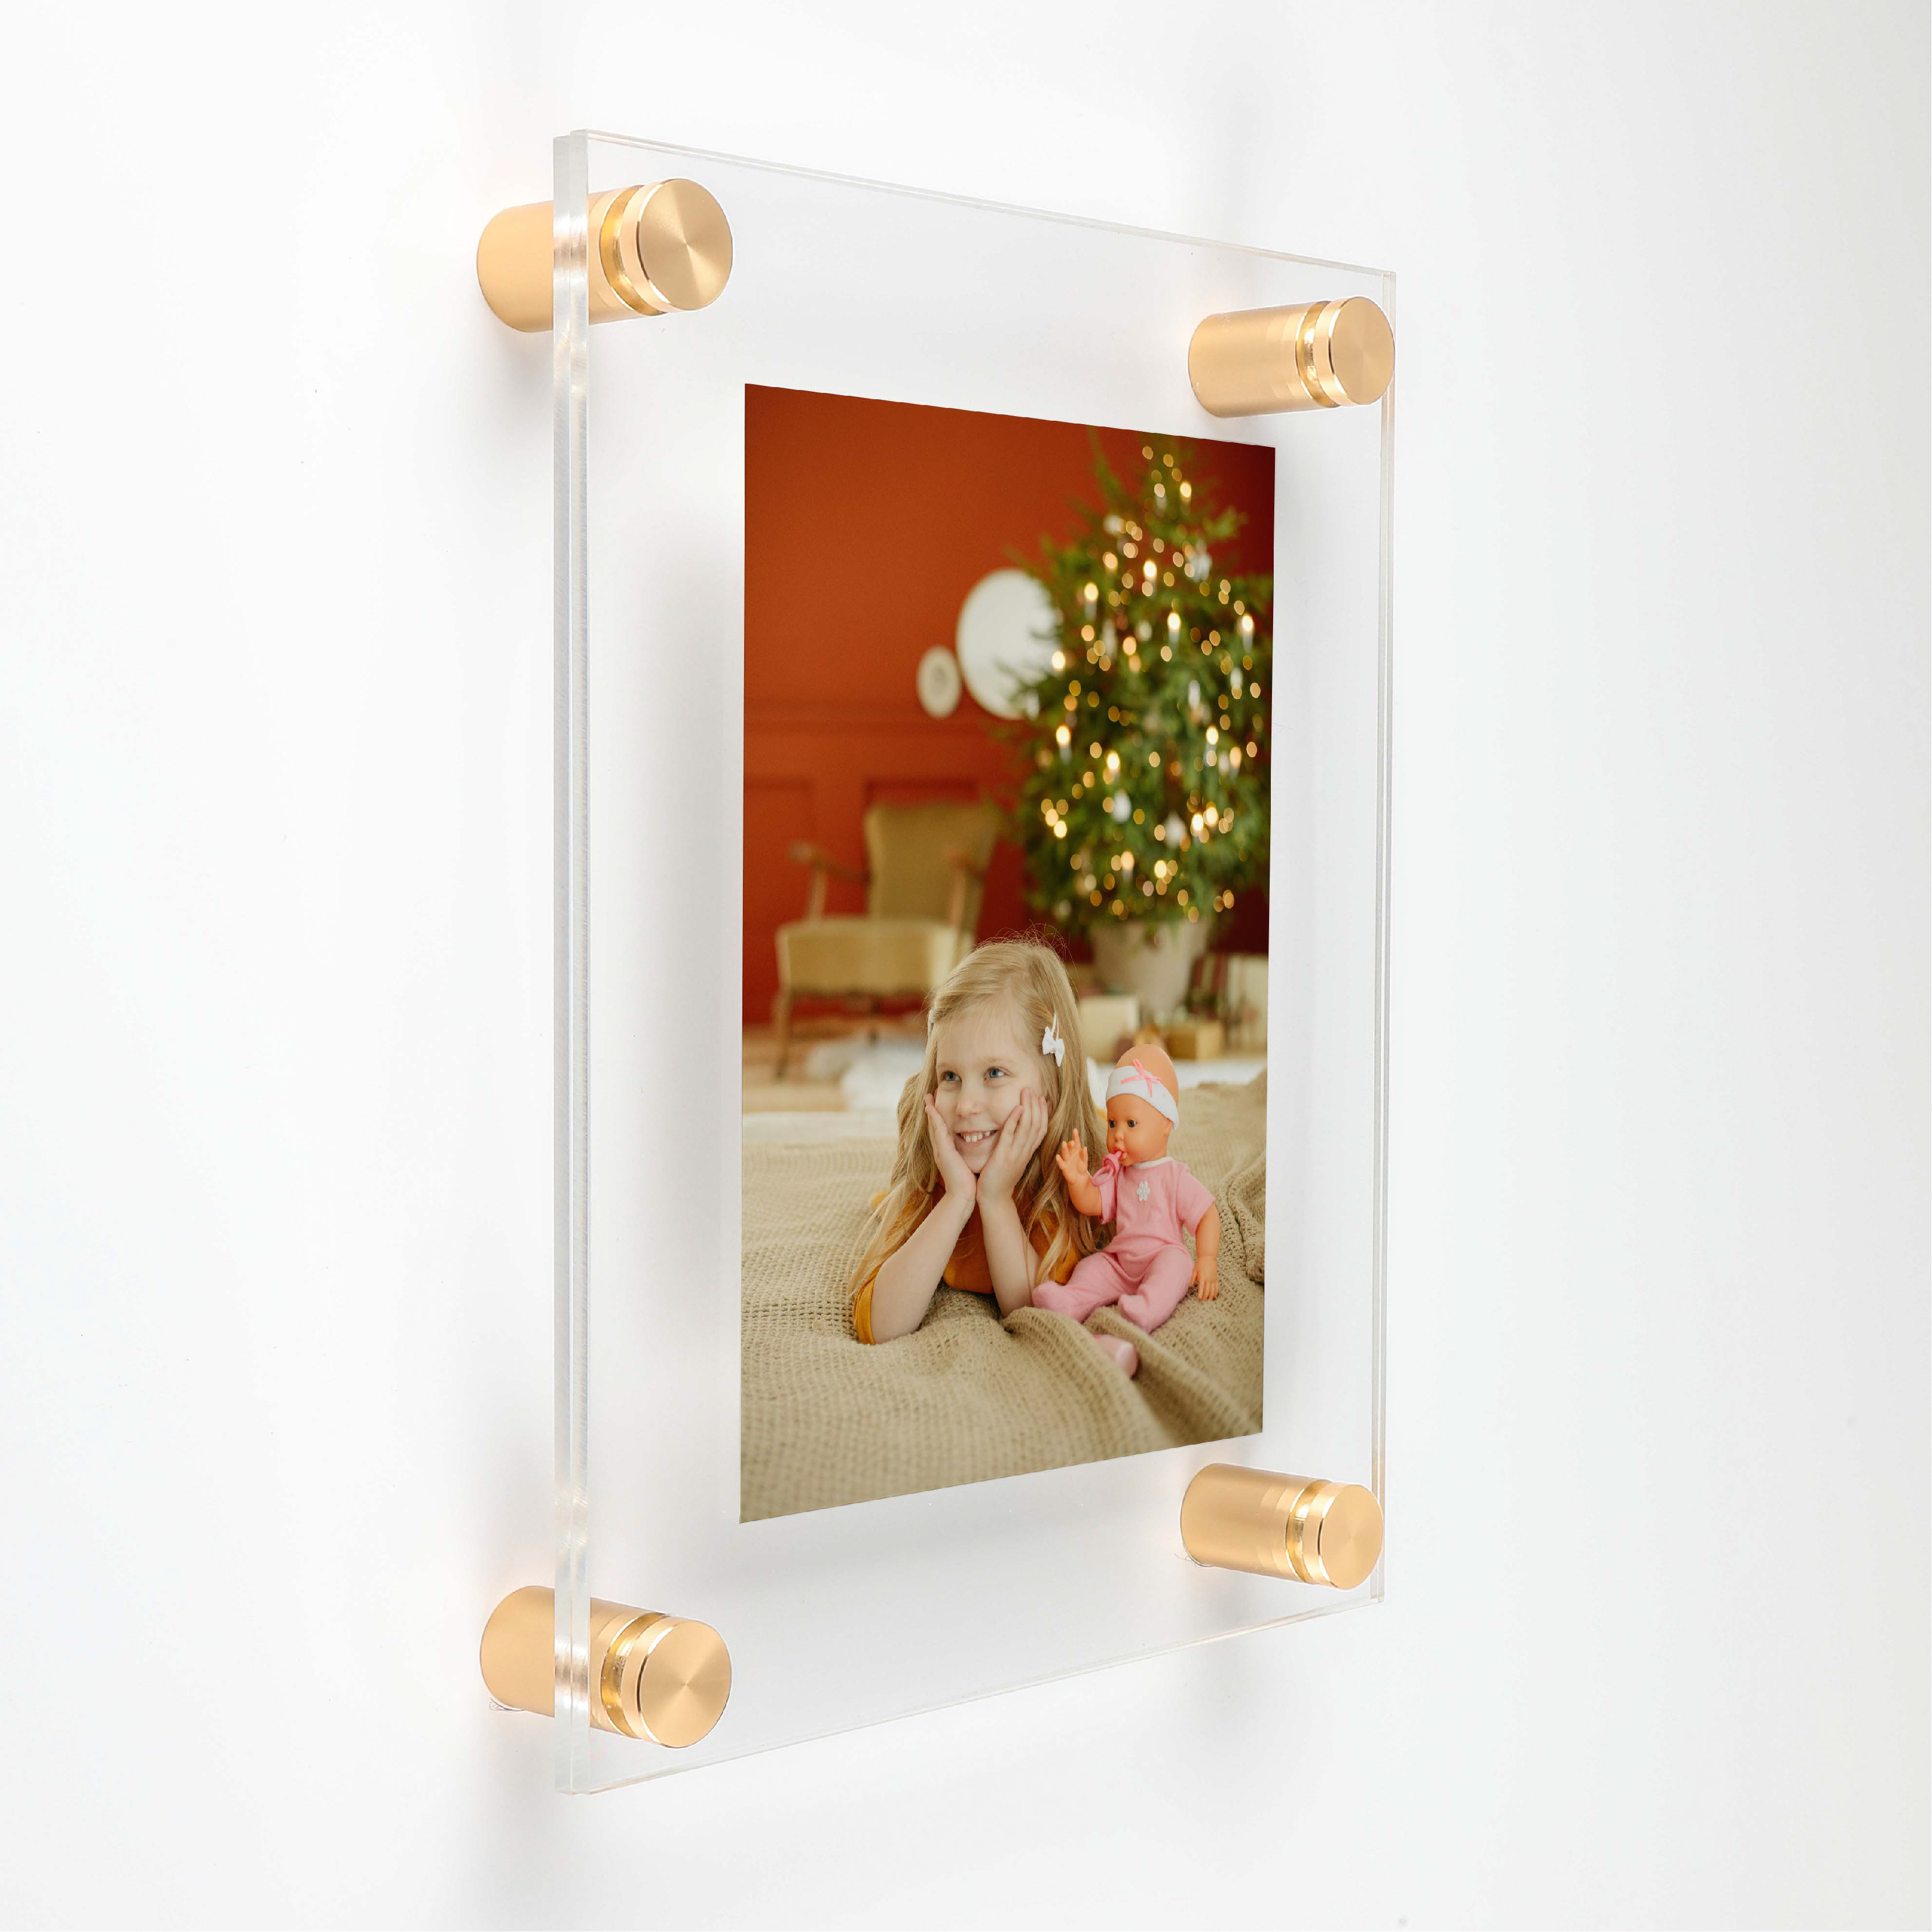 (2) 27'' x 39'' Clear Acrylics , Pre-Drilled With Polished Edges (Thick 3/16'' each), Wall Frame with (6) 3/4'' x 1'' Champagne Anodized Aluminum Standoffs includes Screws and Anchors